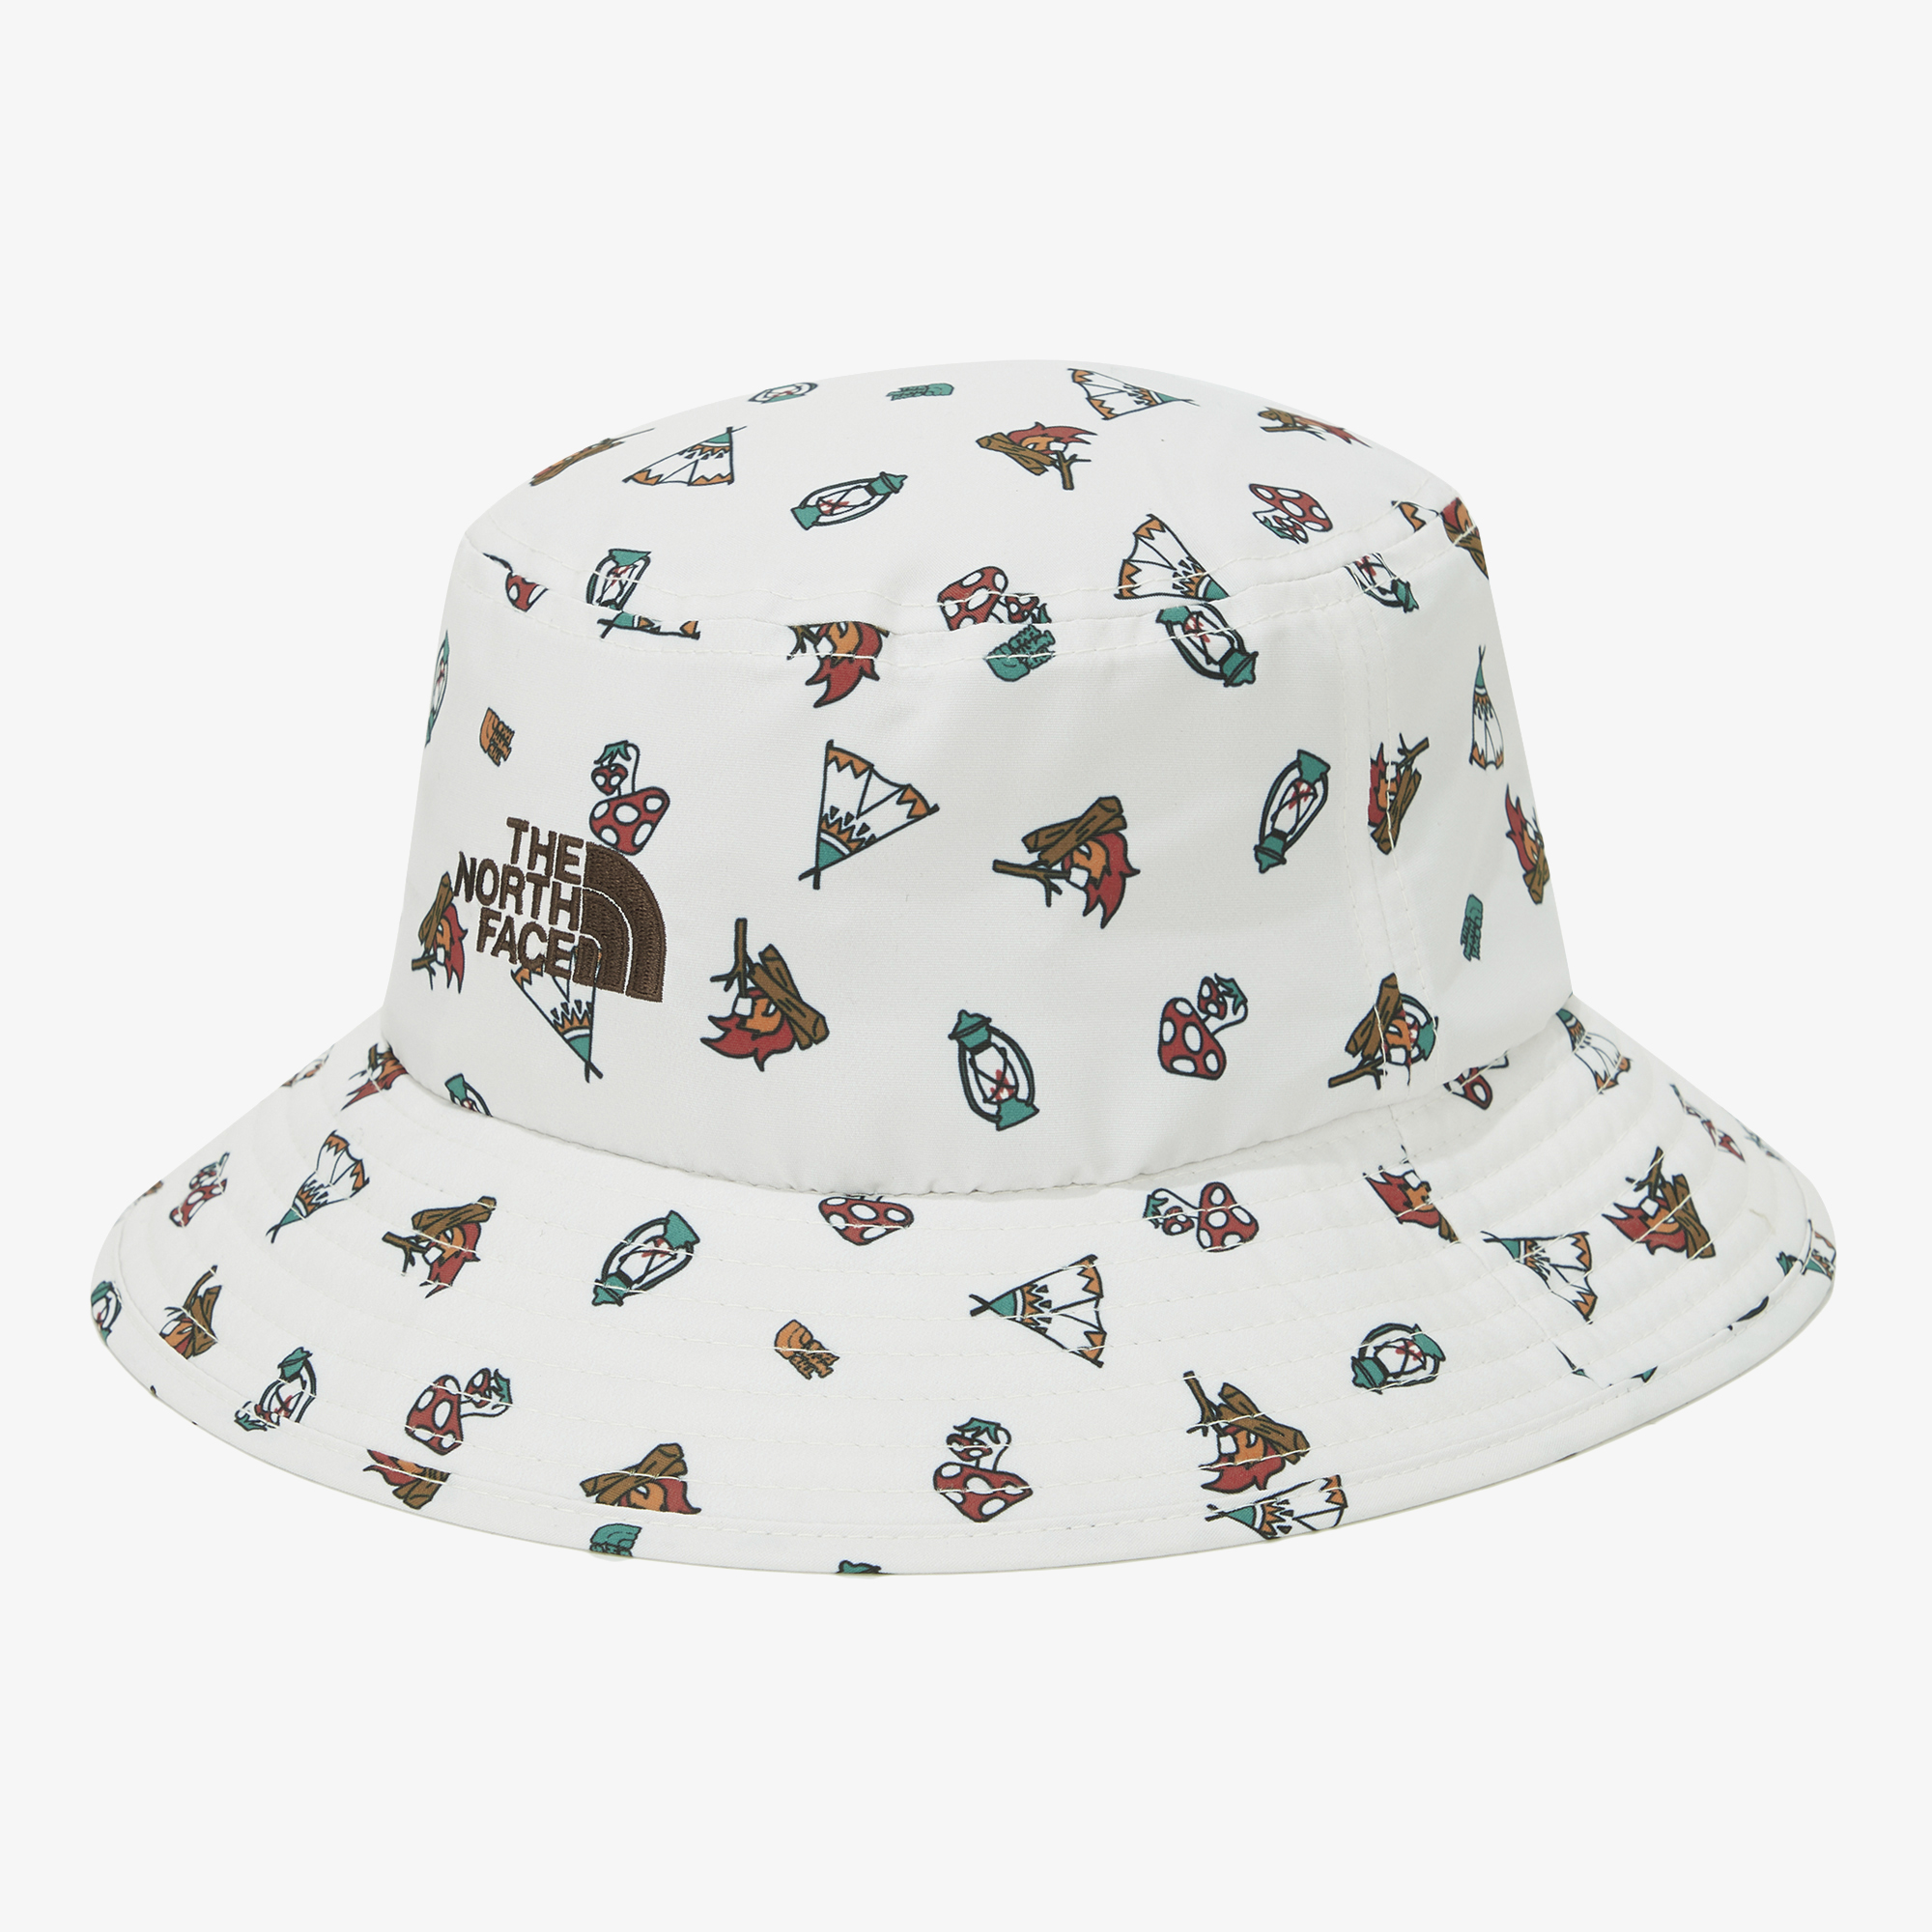 THE NORTH FACE-KIDS BUCKET HAT PRT